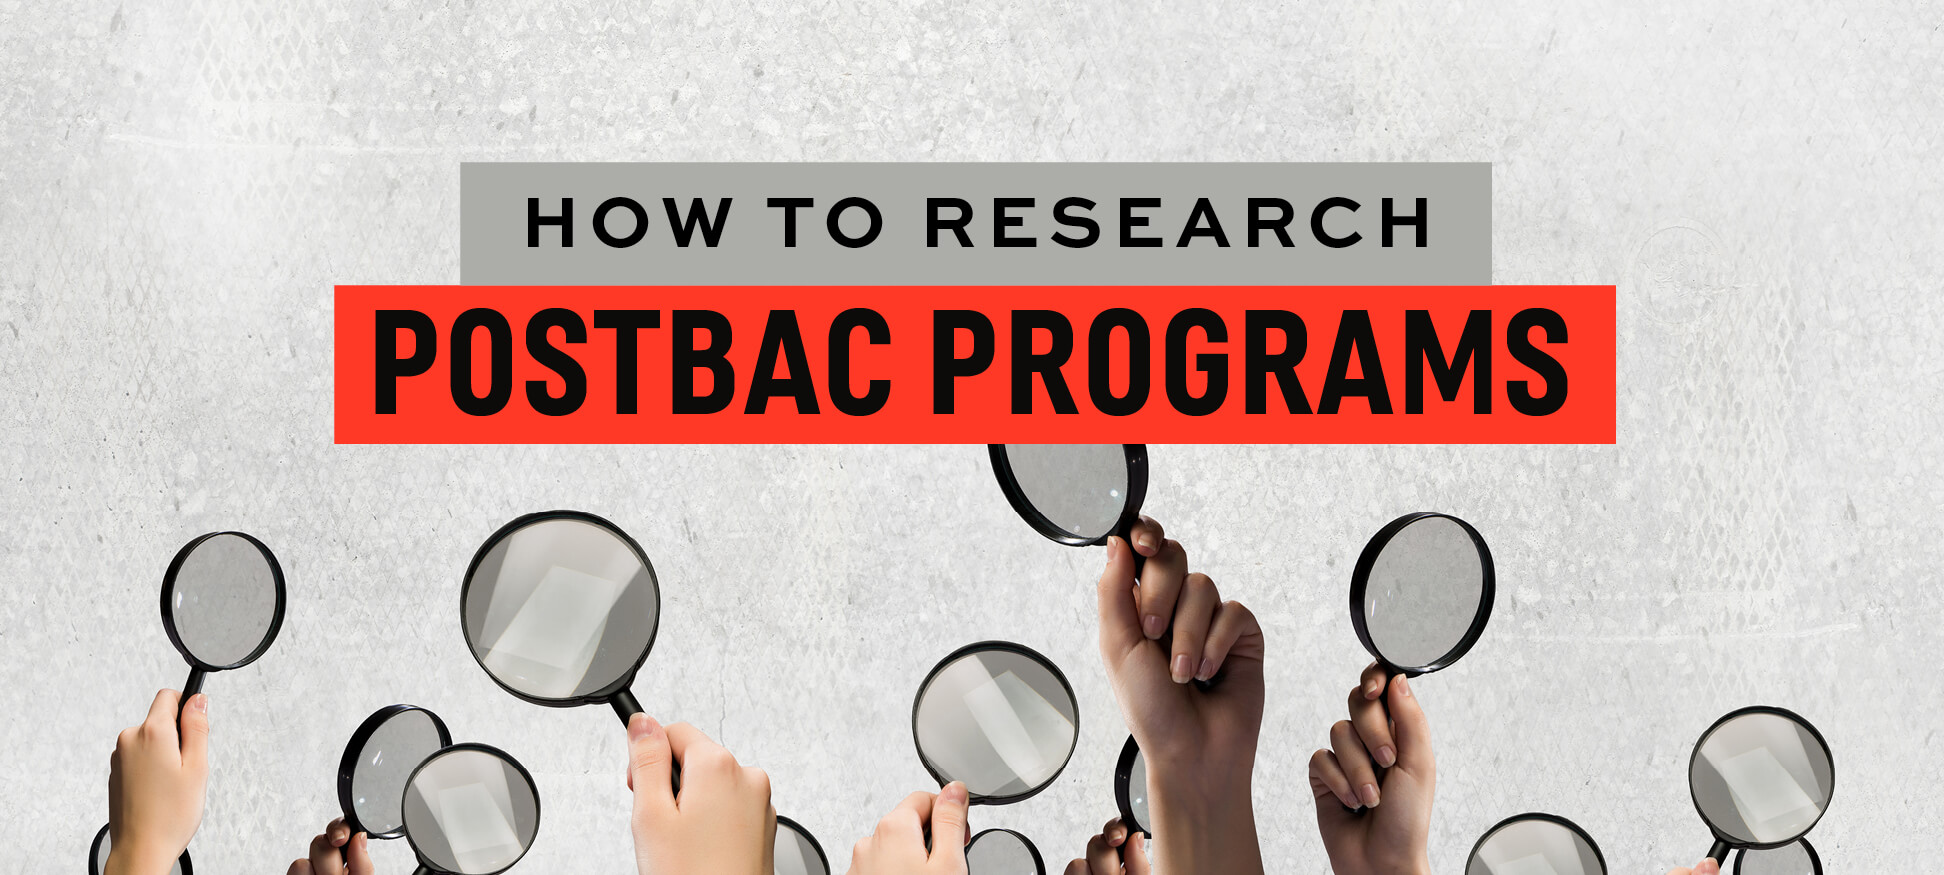 Download your free guide to applying successfully to postbac programs!